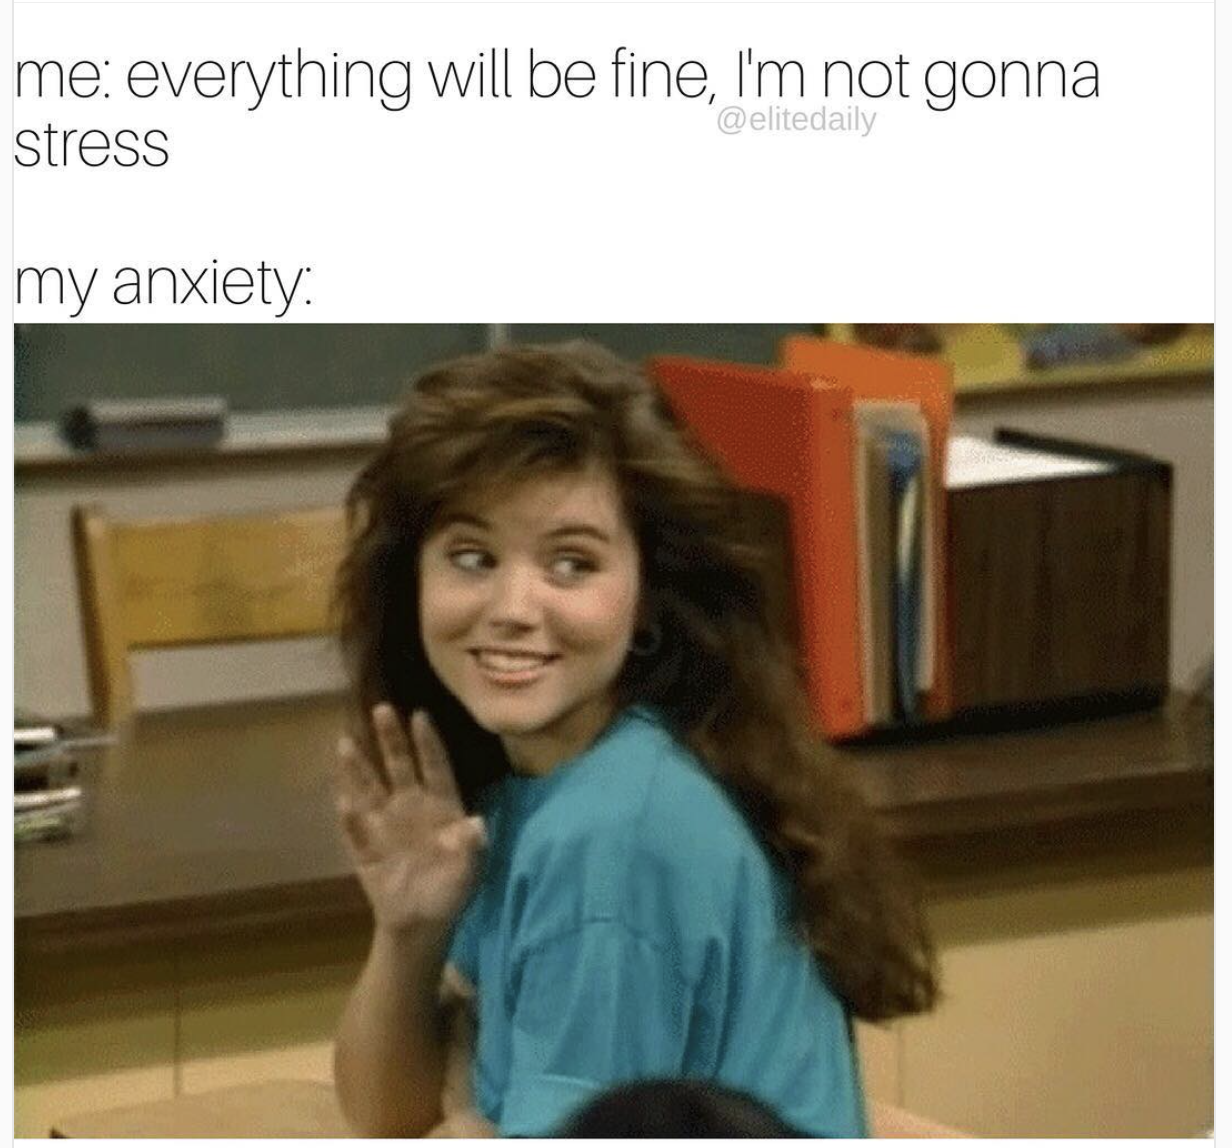 hey boy gif - me everything will be fine, I'm not gonna stress my anxiety.